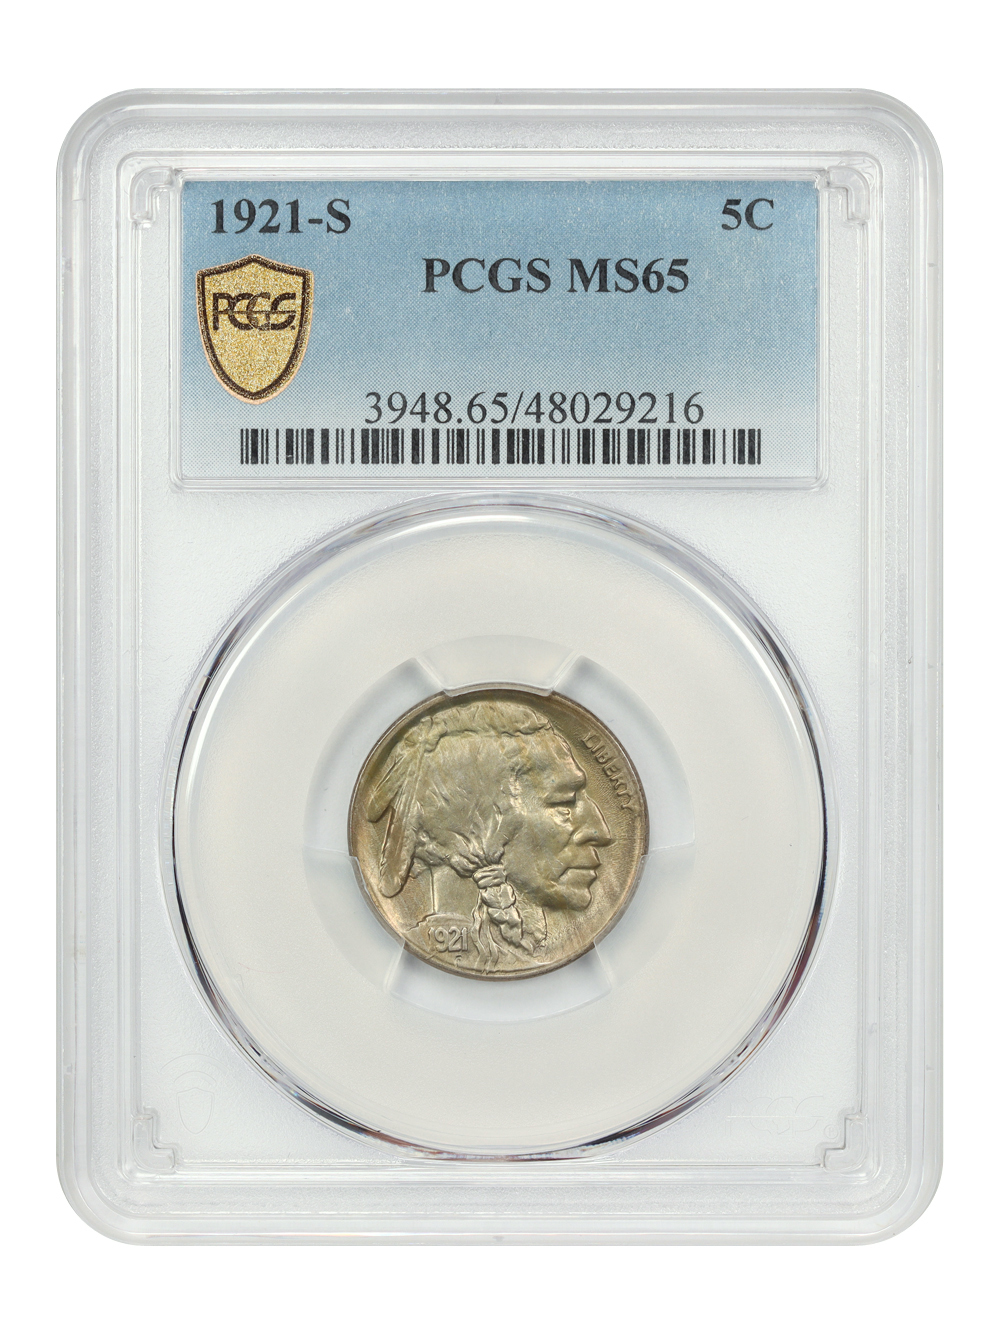 Primary image for 1921-S 5C PCGS MS65